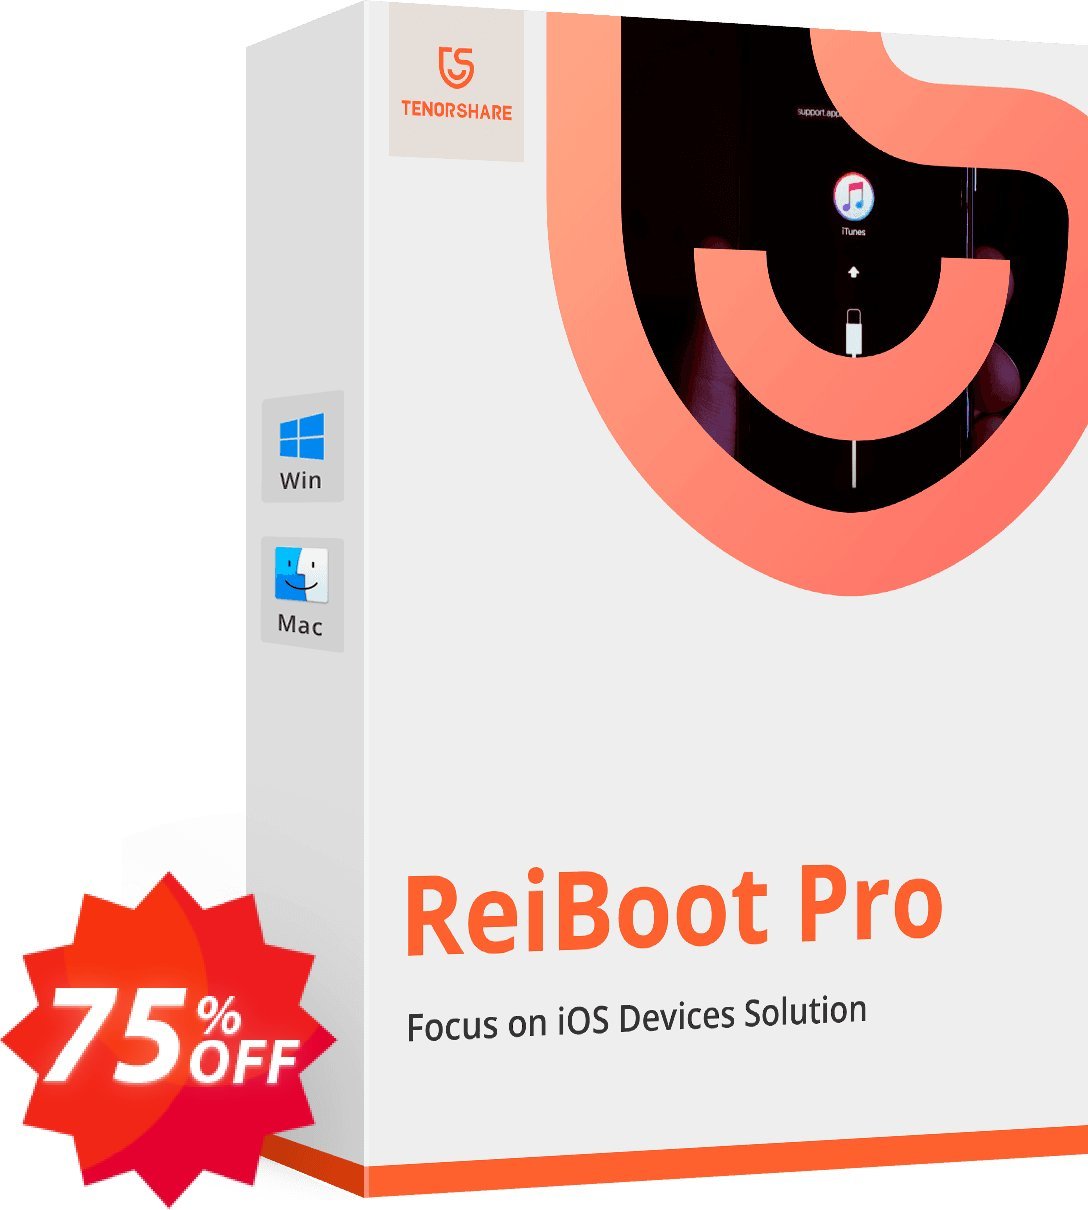 Tenorshare ReiBoot Pro, Monthly Plan  Coupon code 75% discount 